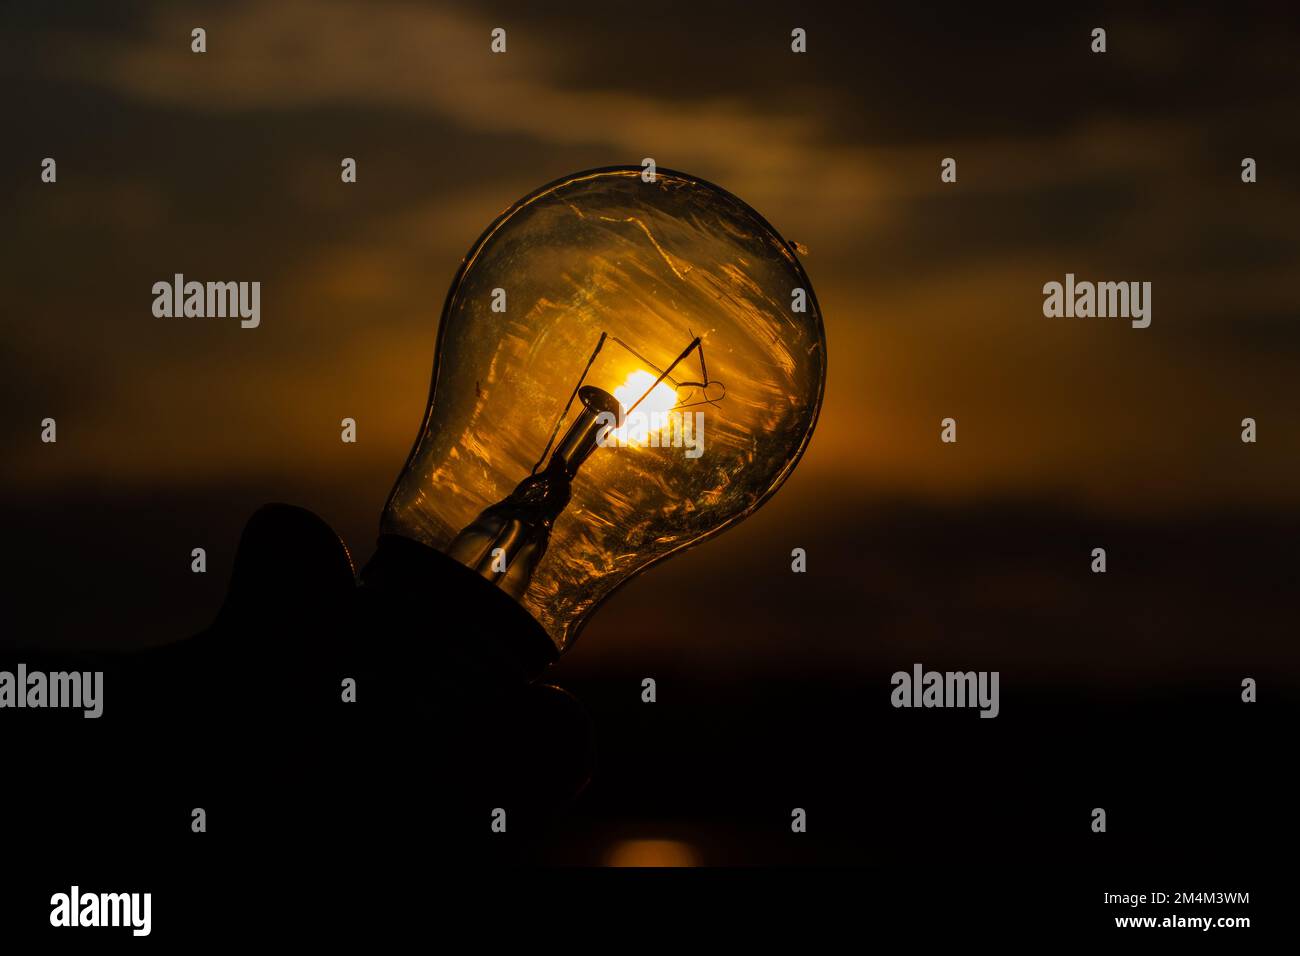 incandescent light bulb in hand on sunset background close up Stock Photo